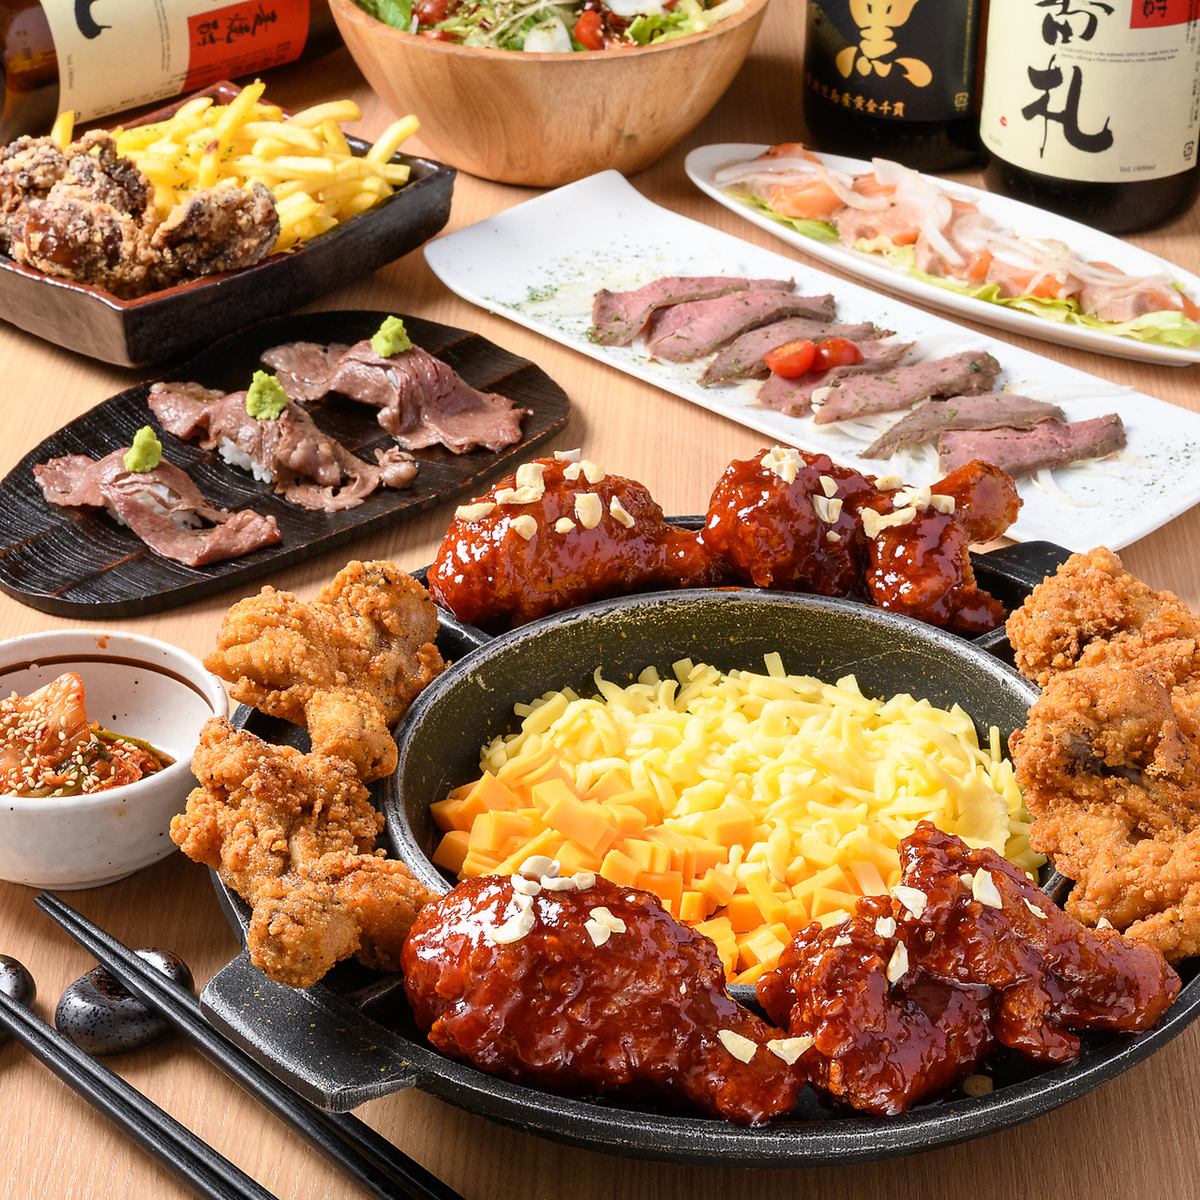 We also offer Korean food courses such as UFO chicken and dakgalbi that will look great on SNS!